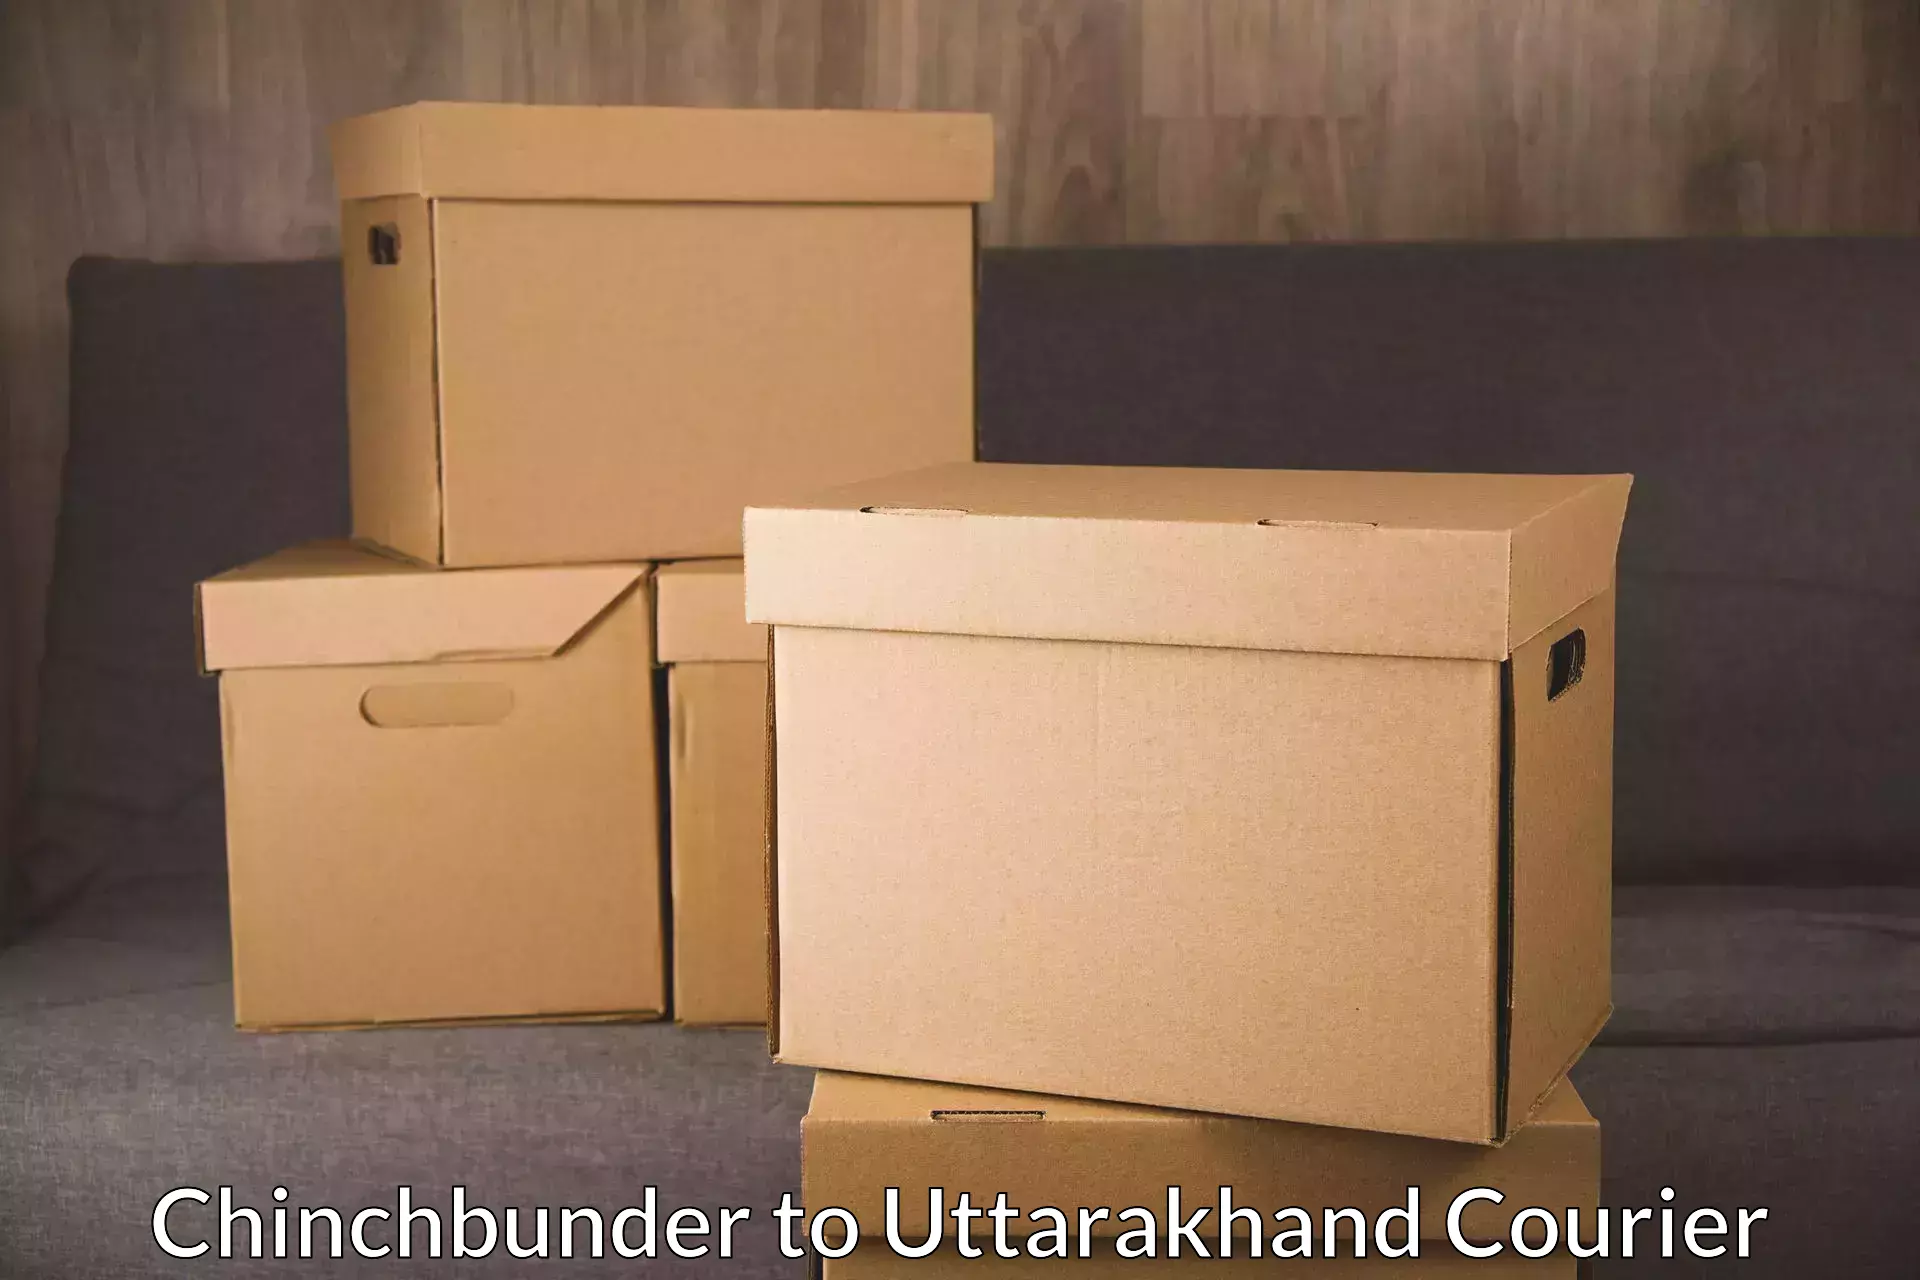 Round-the-clock parcel delivery Chinchbunder to Tanakpur